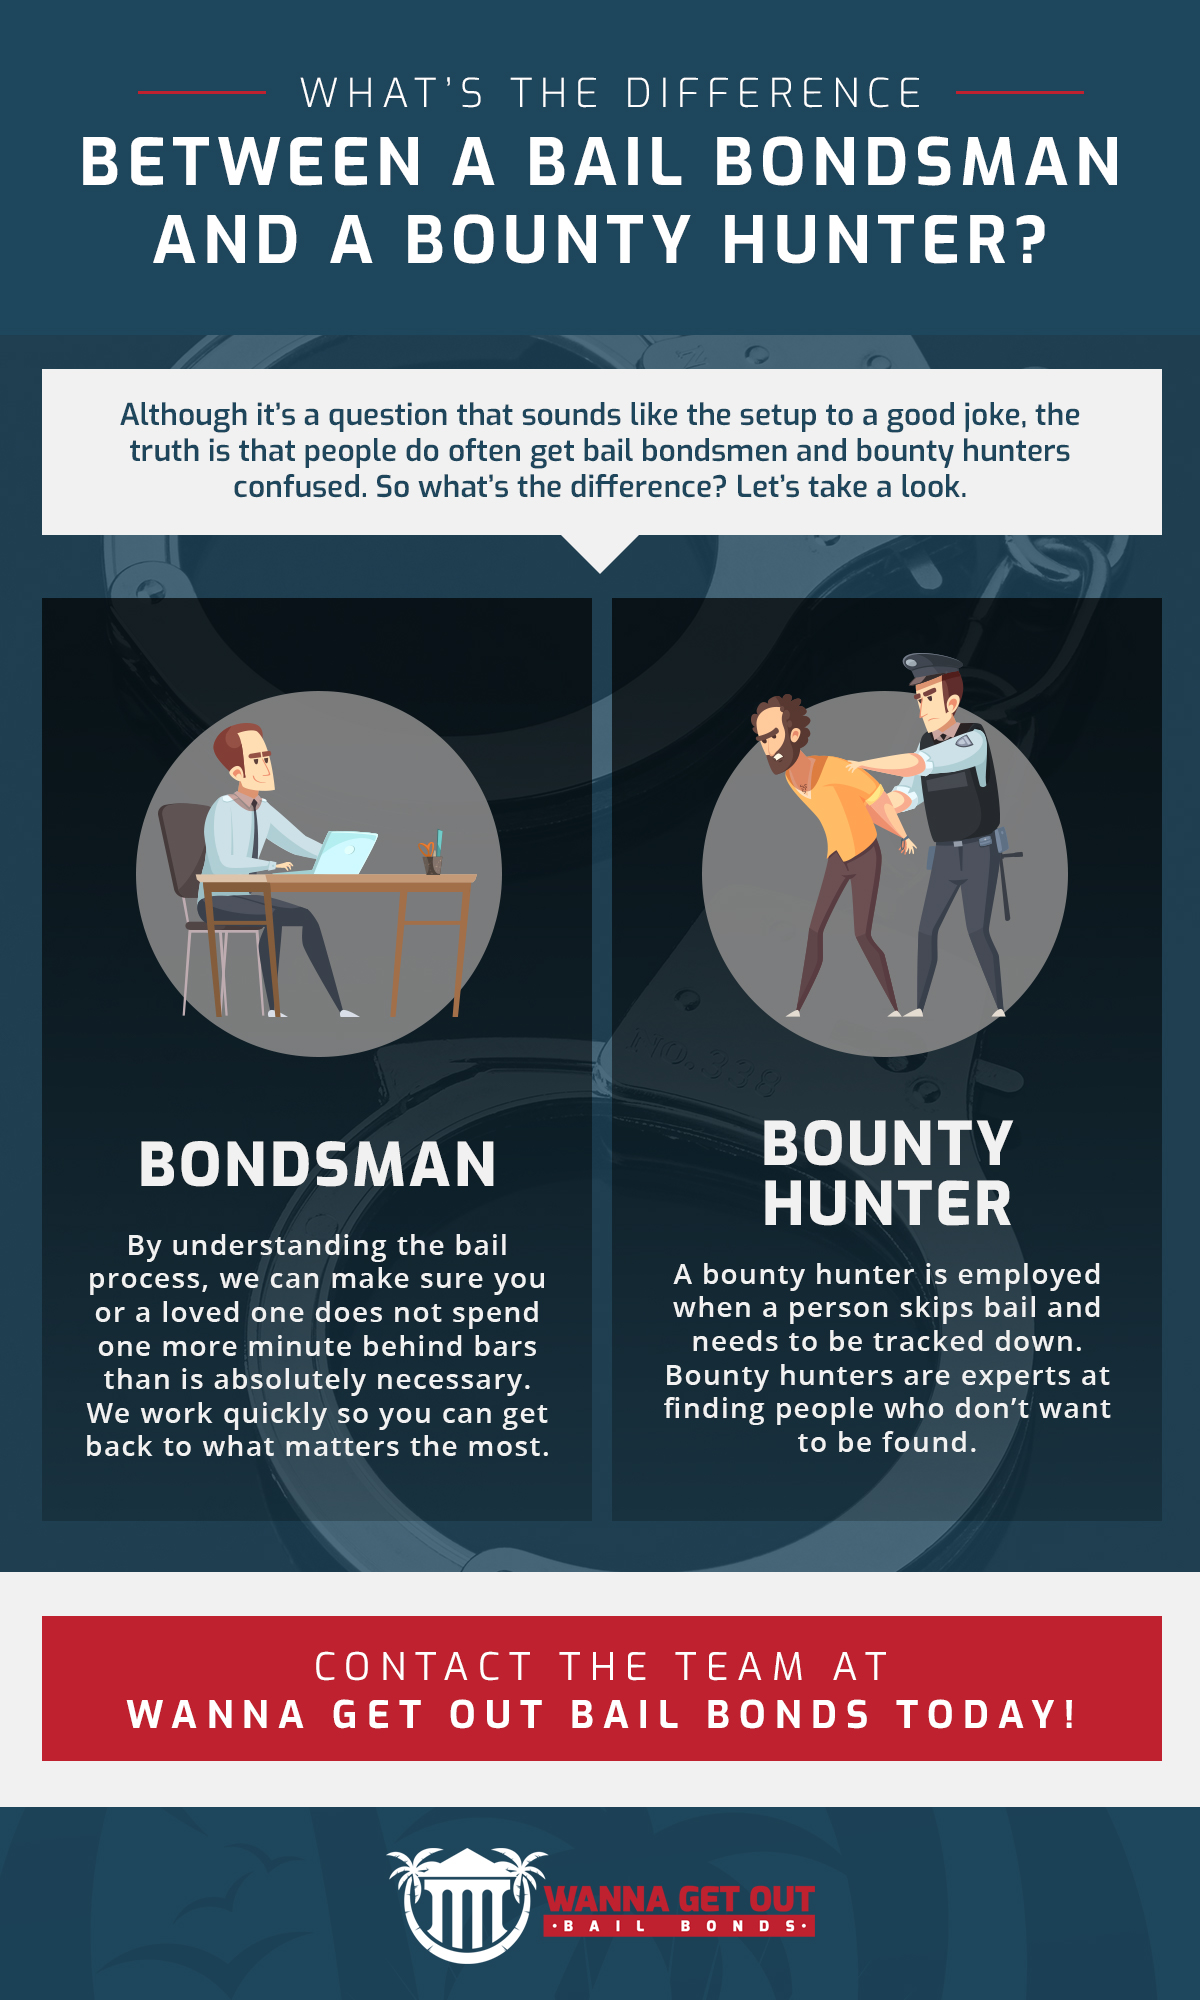 What’s the Difference Between a Bail Bondsman and a Bounty Hunter